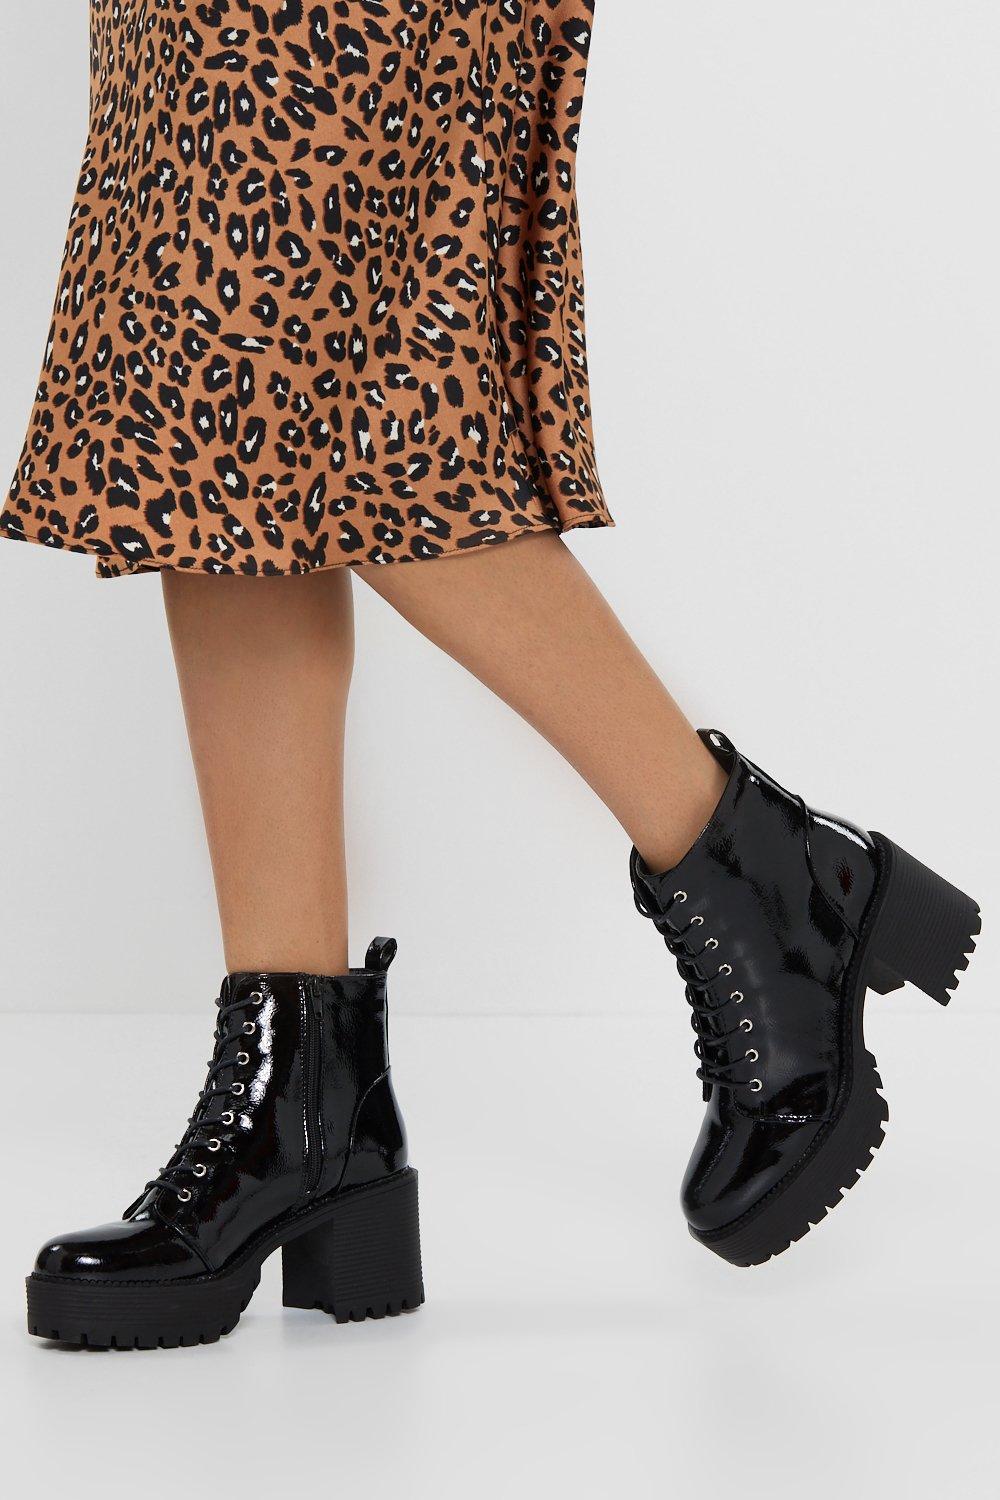 dresses with chunky boots